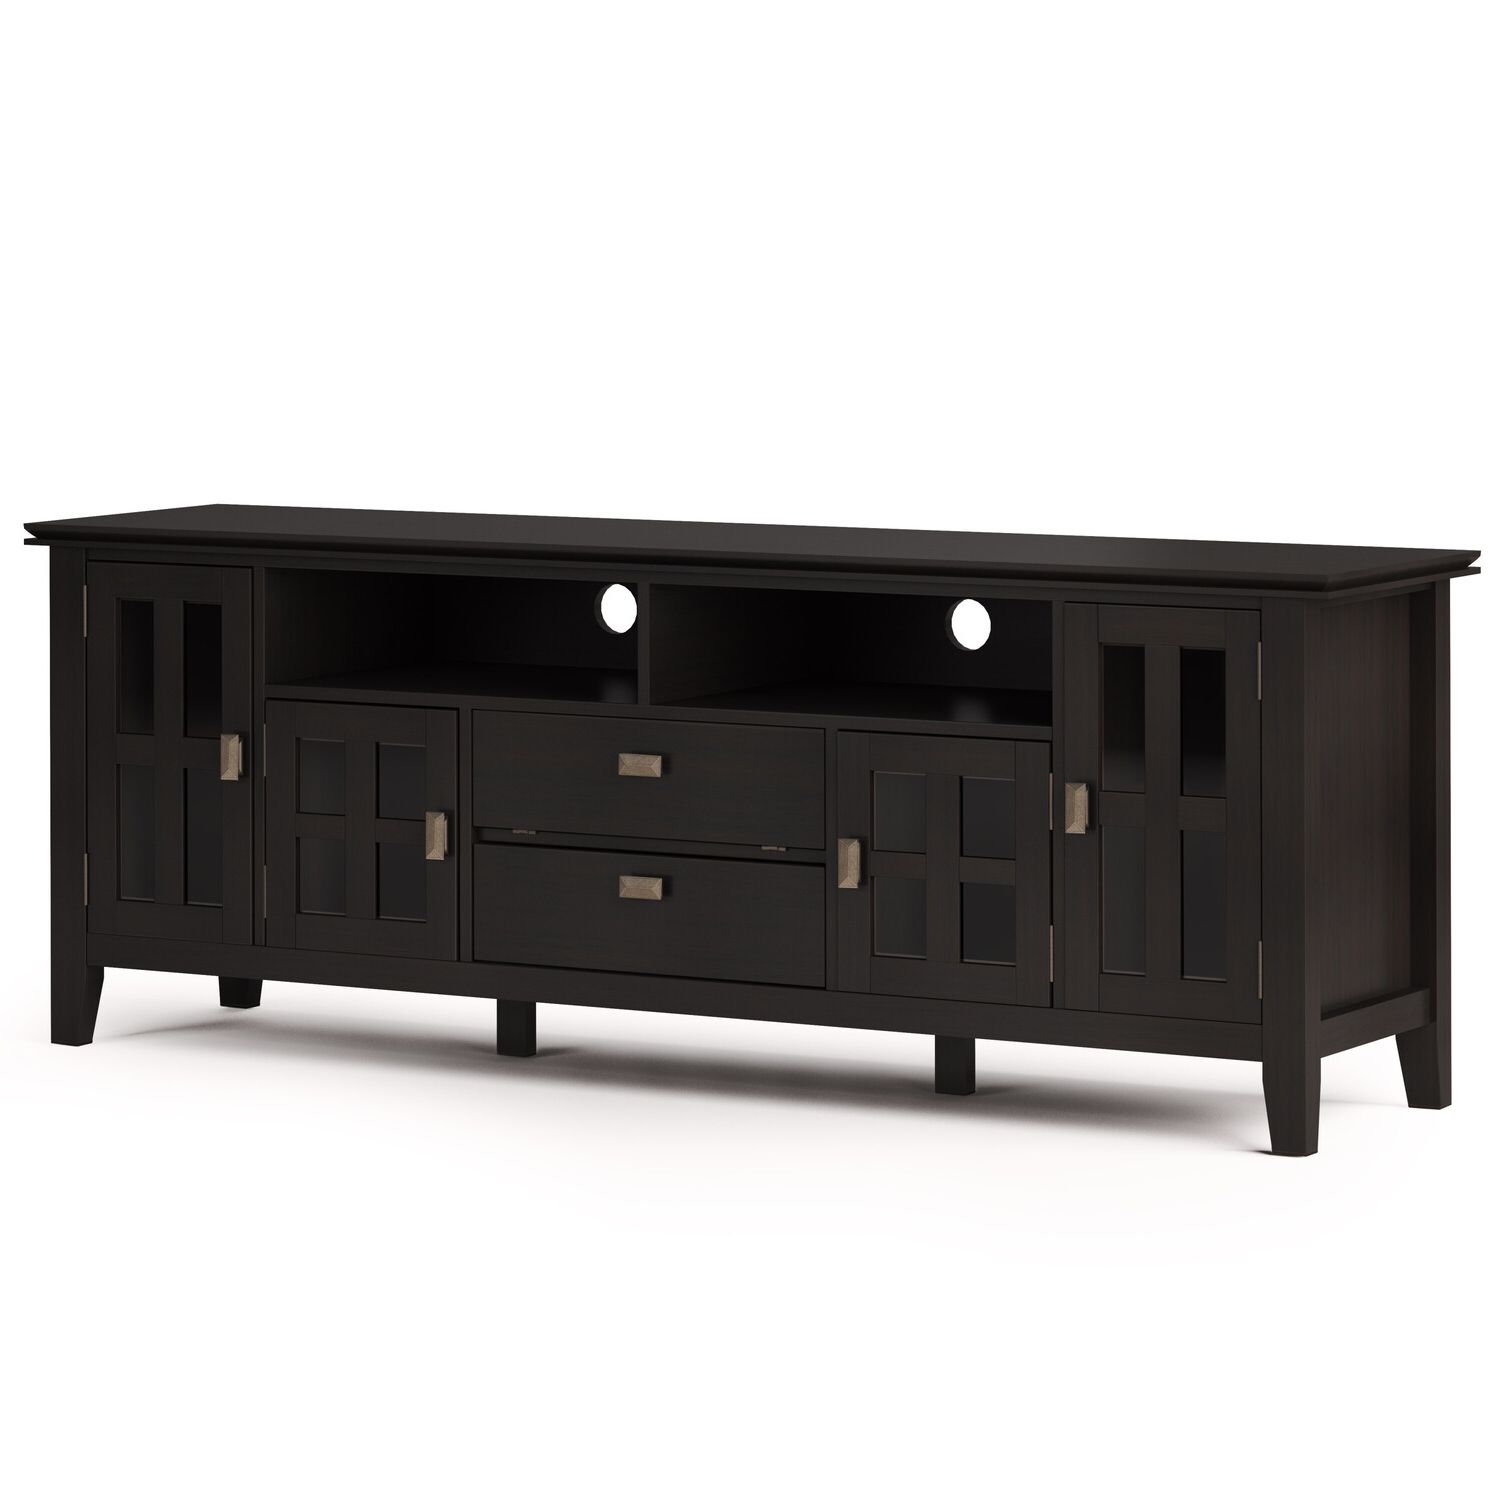 Simpli Home Artisan Solid Wood 72 Inch Wide Contemporary With Regard To Greenwich Wide Tv Stands (View 5 of 20)